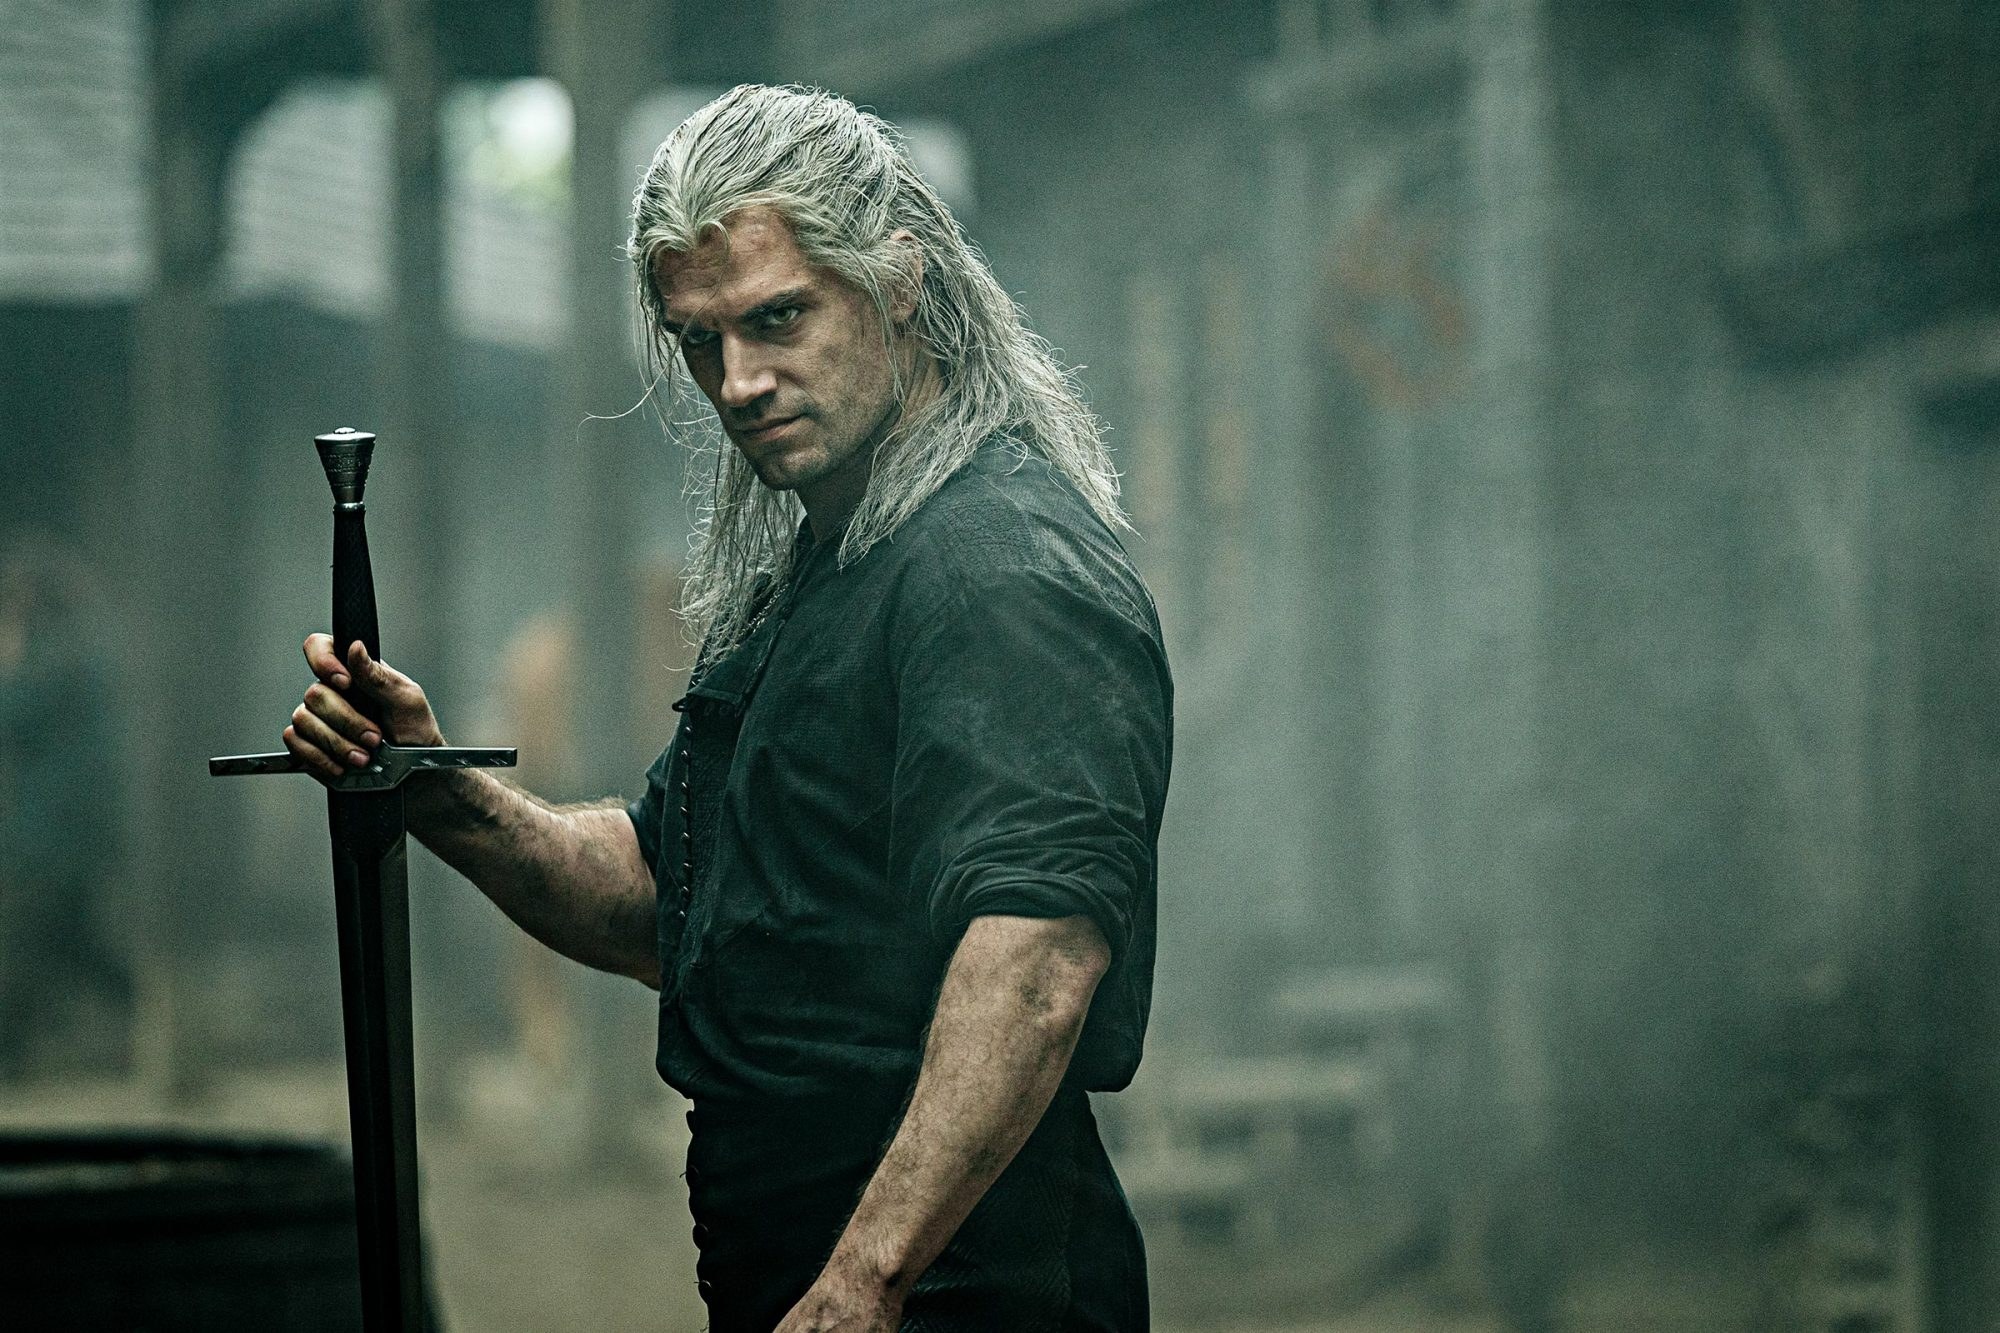 The Witcher producer blames its falling viewership and simplified plot on Americans